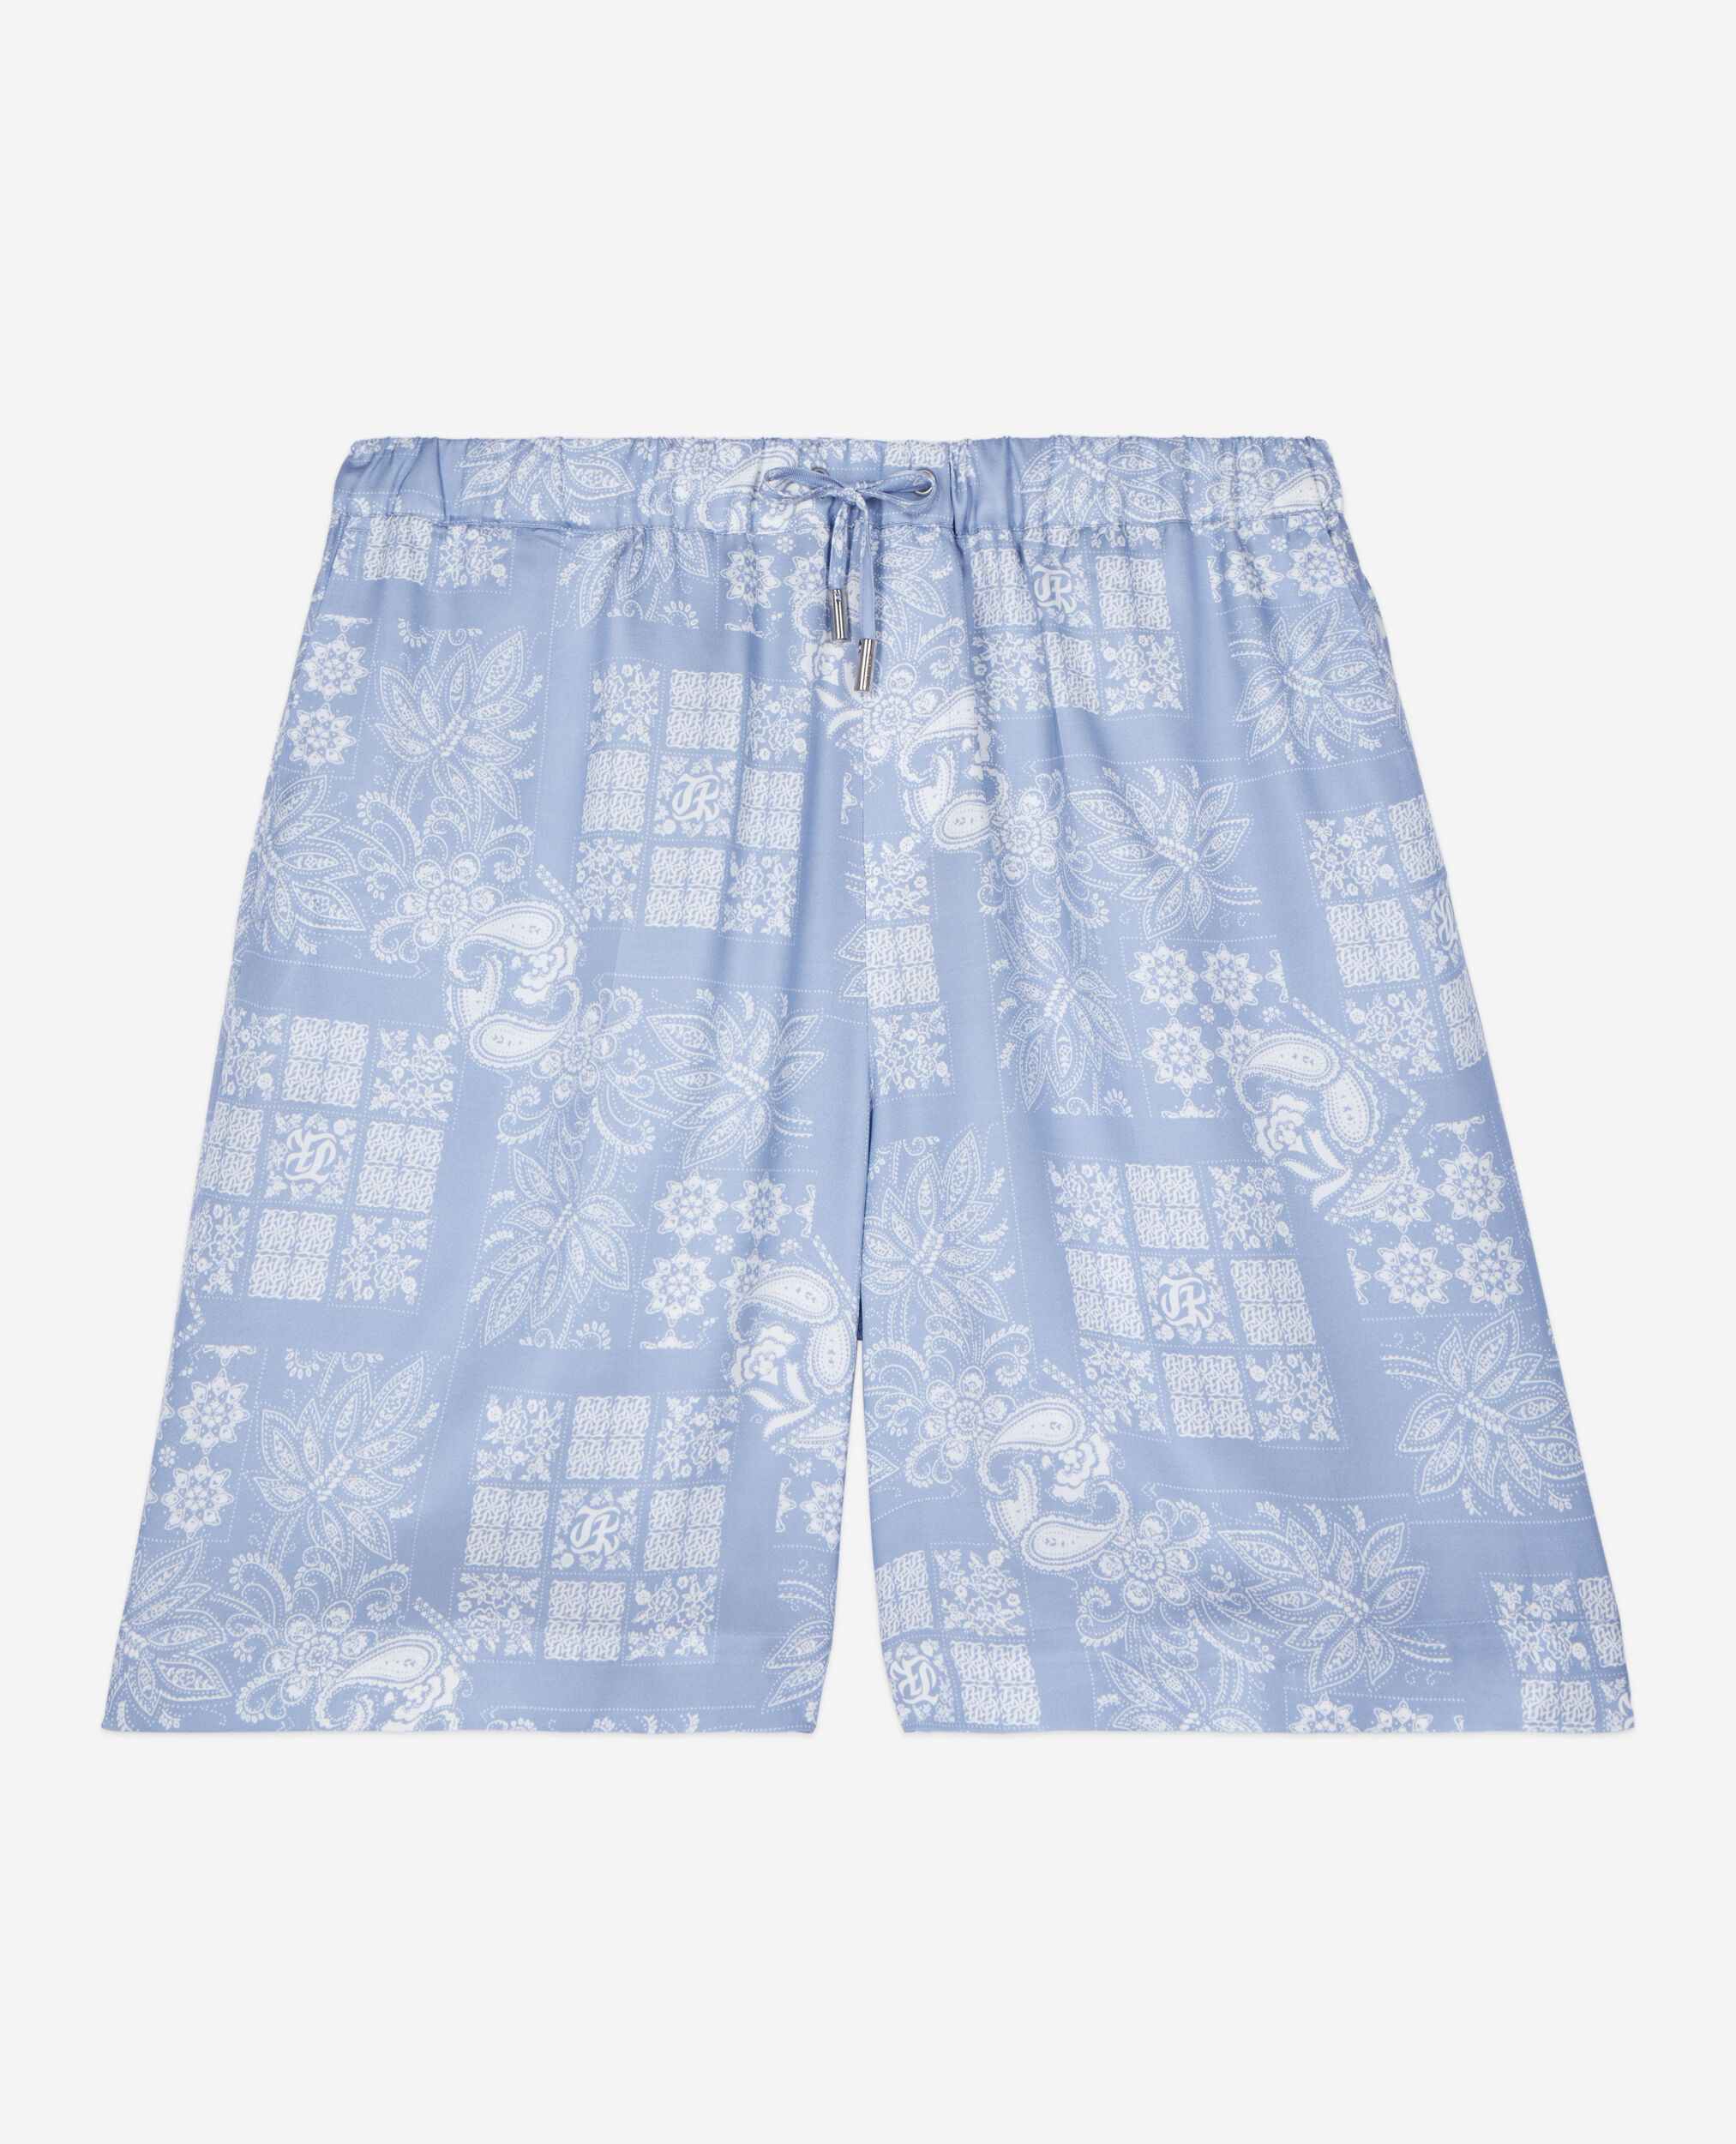 Shorts mit Print, WHITE / SKY BLUE, hi-res image number null